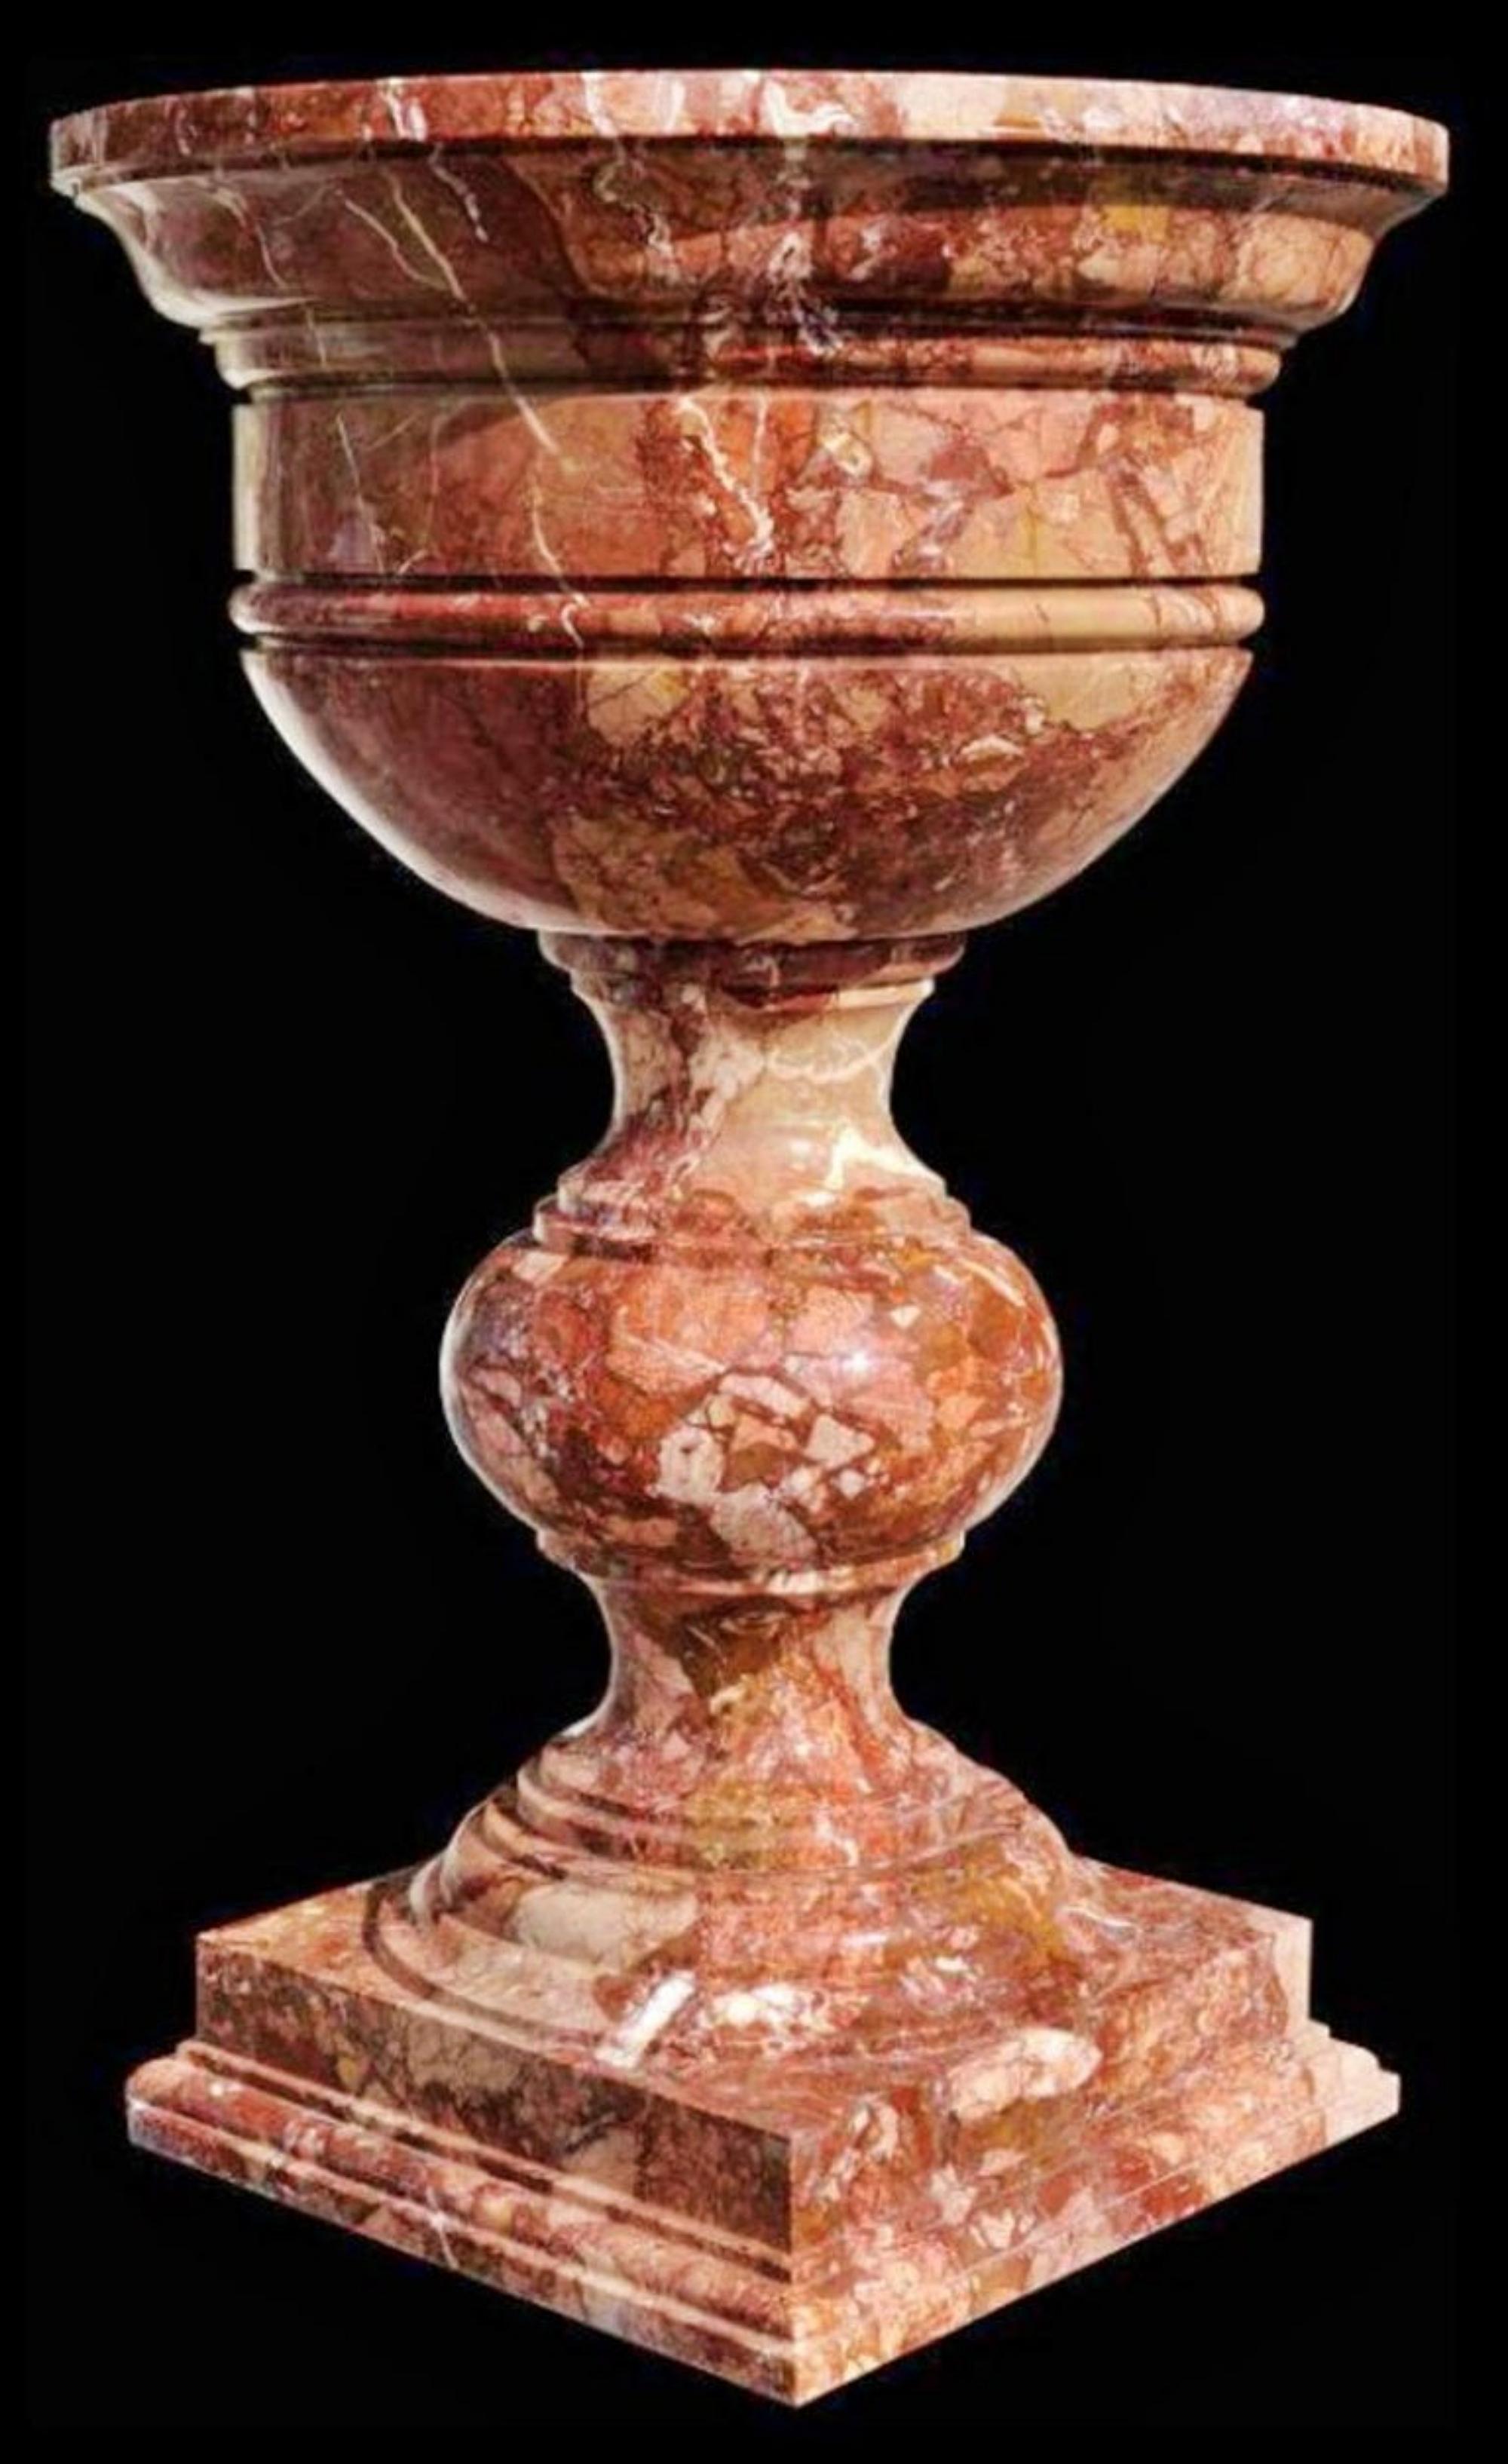 Holy water from Friuli - Italy early 20th century
Breccia partridge, copy of a seventeenth-century artefact
Height 105cm
Diameter 70cm
Width70cm
Depth 40cm
Perfect conditions.

